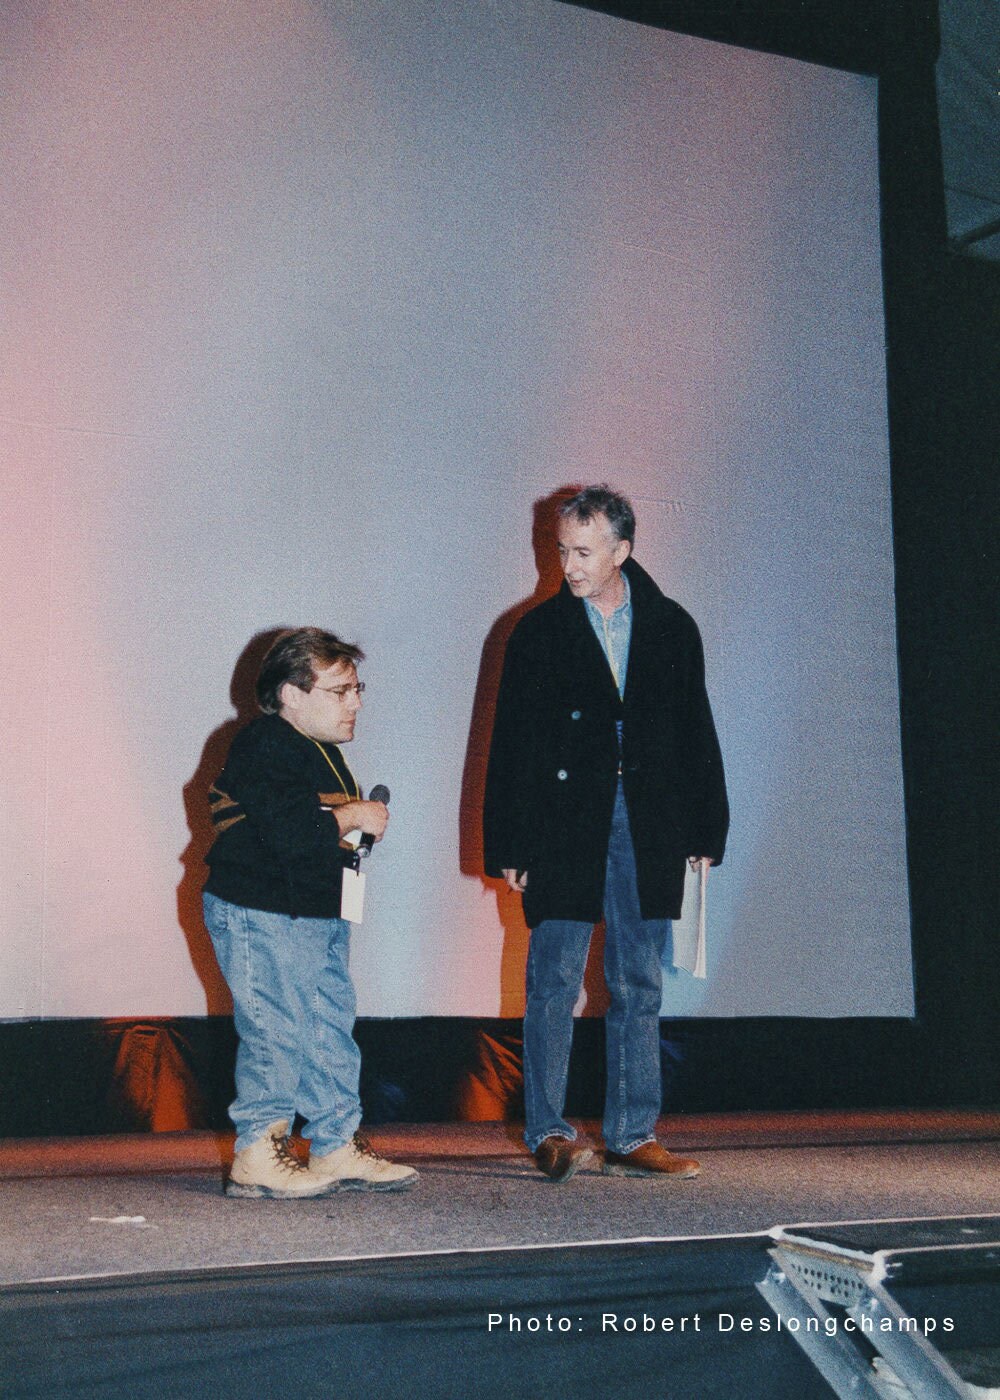 Anthony Daniels and Dan Madsen rehearse on stage the evening before Star Wars Celebration I opened to the public. 